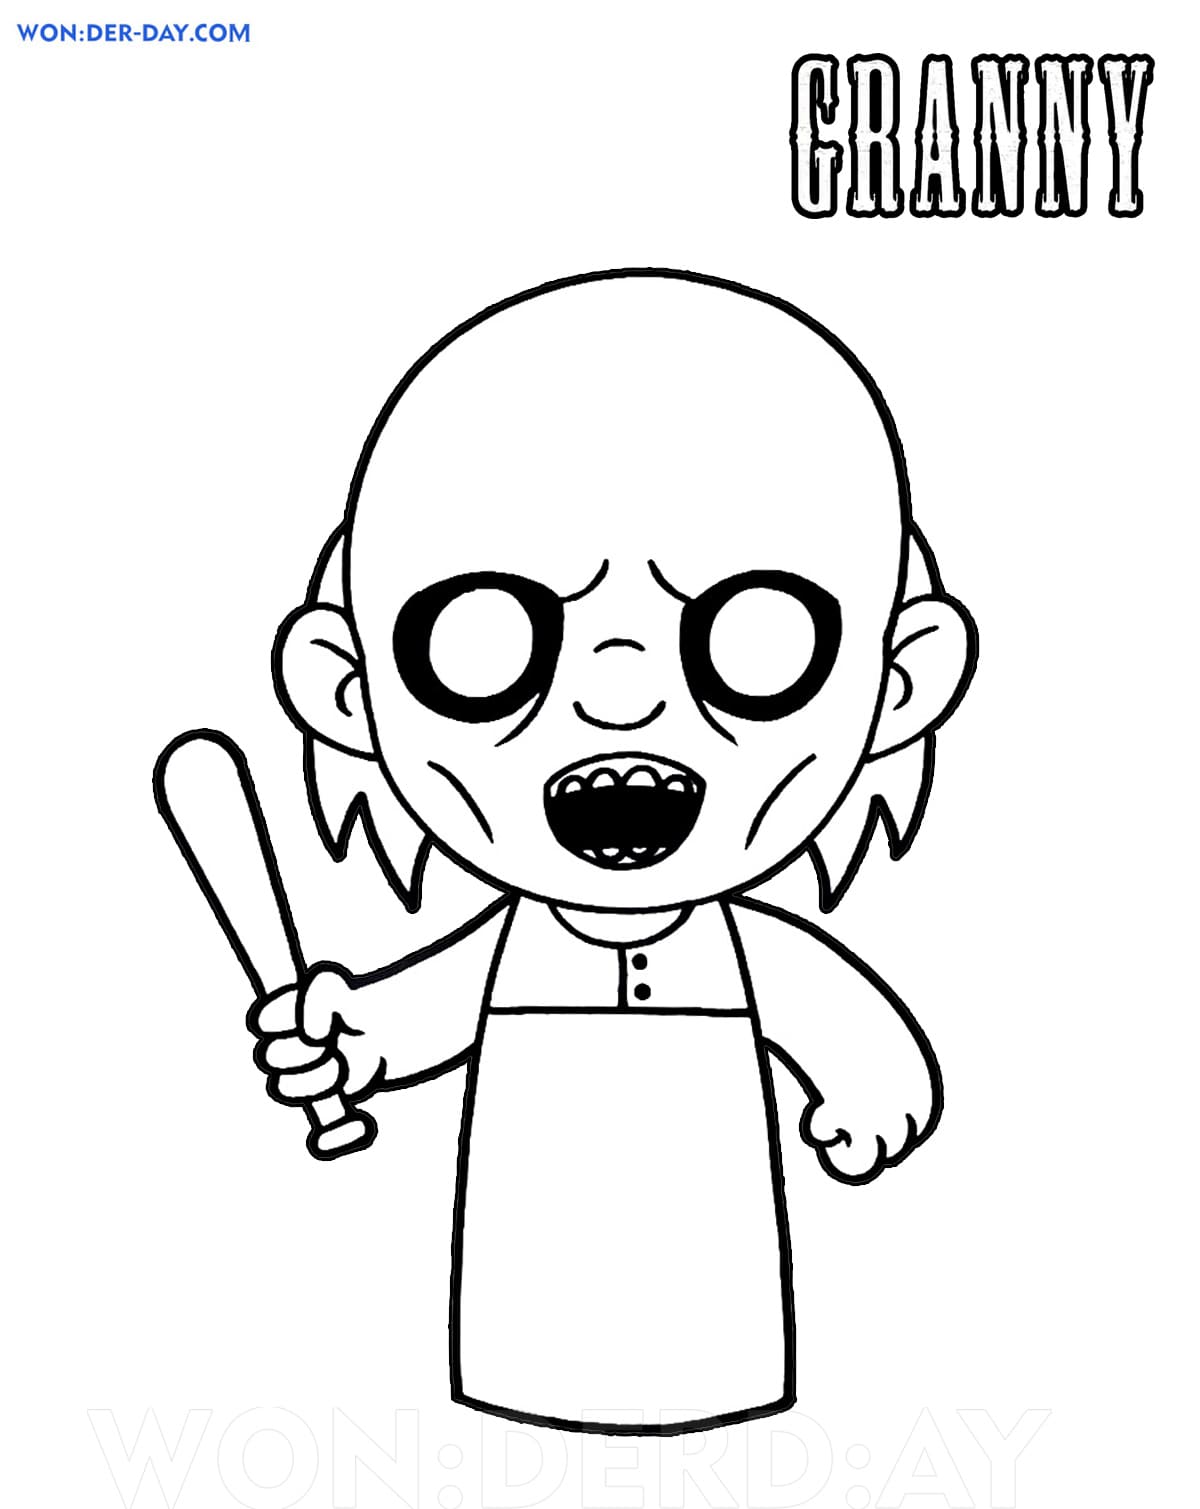 Granny Horror Game Coloring Pages | WONDER DAY — Coloring pages for  children and adults